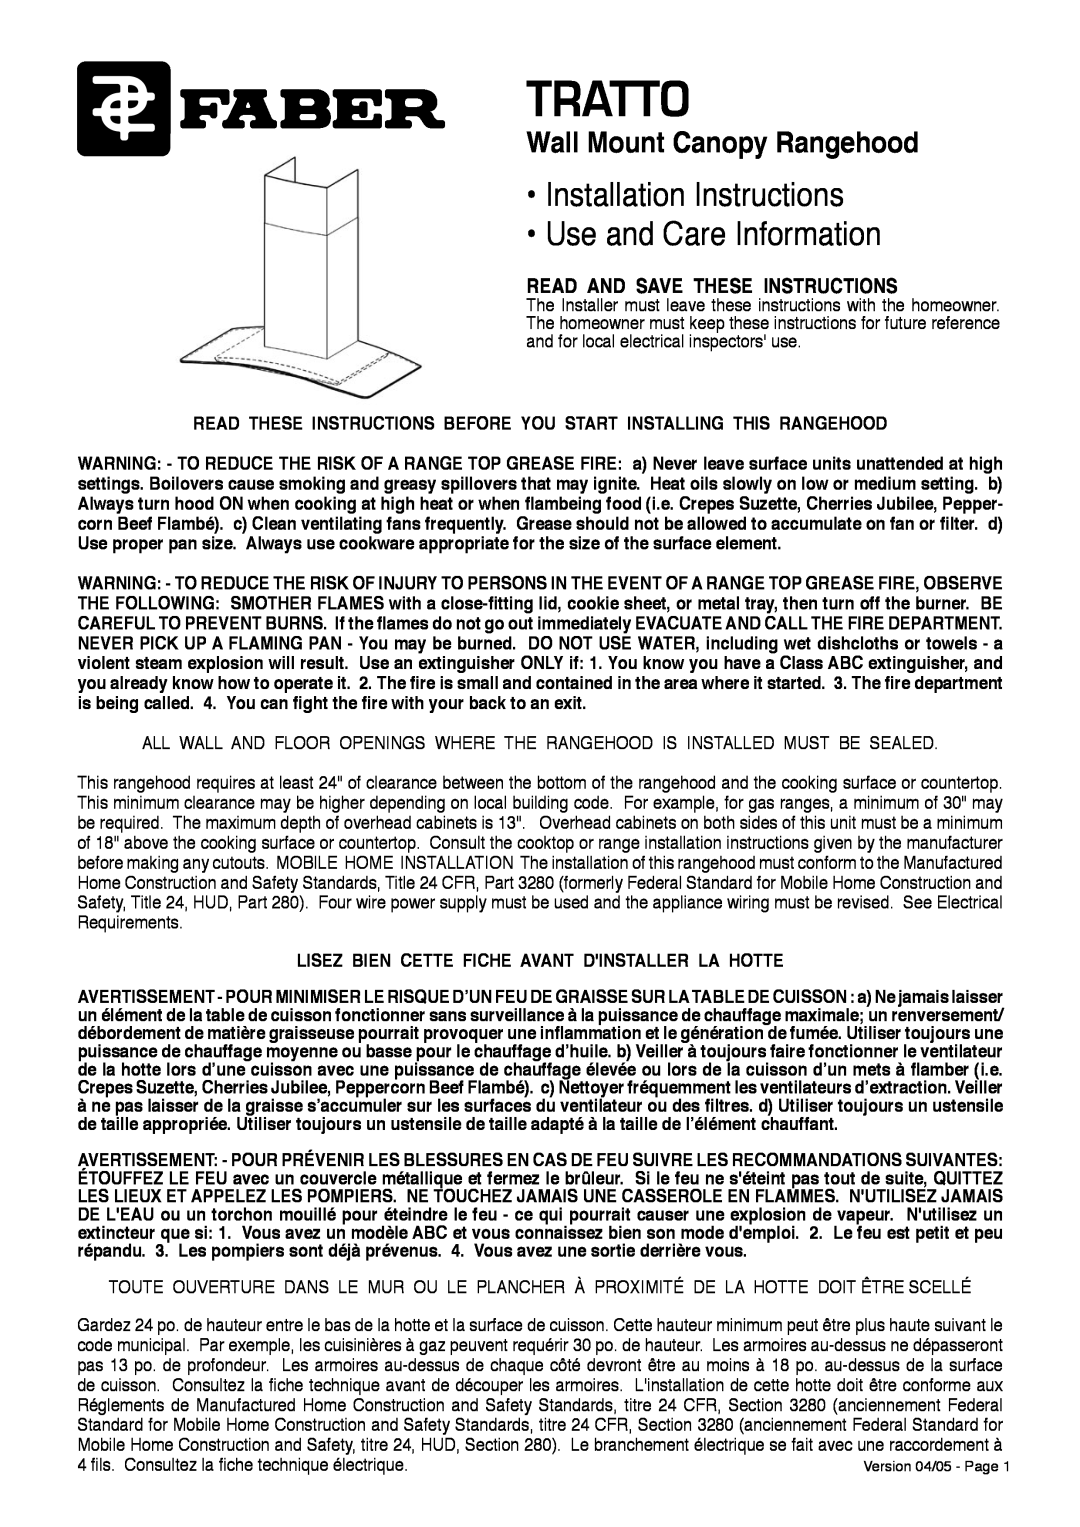 Faber TRATTO installation instructions Read And Save These Instructions, Lisez Bien Cette Fiche Avant Dinstaller La Hotte 